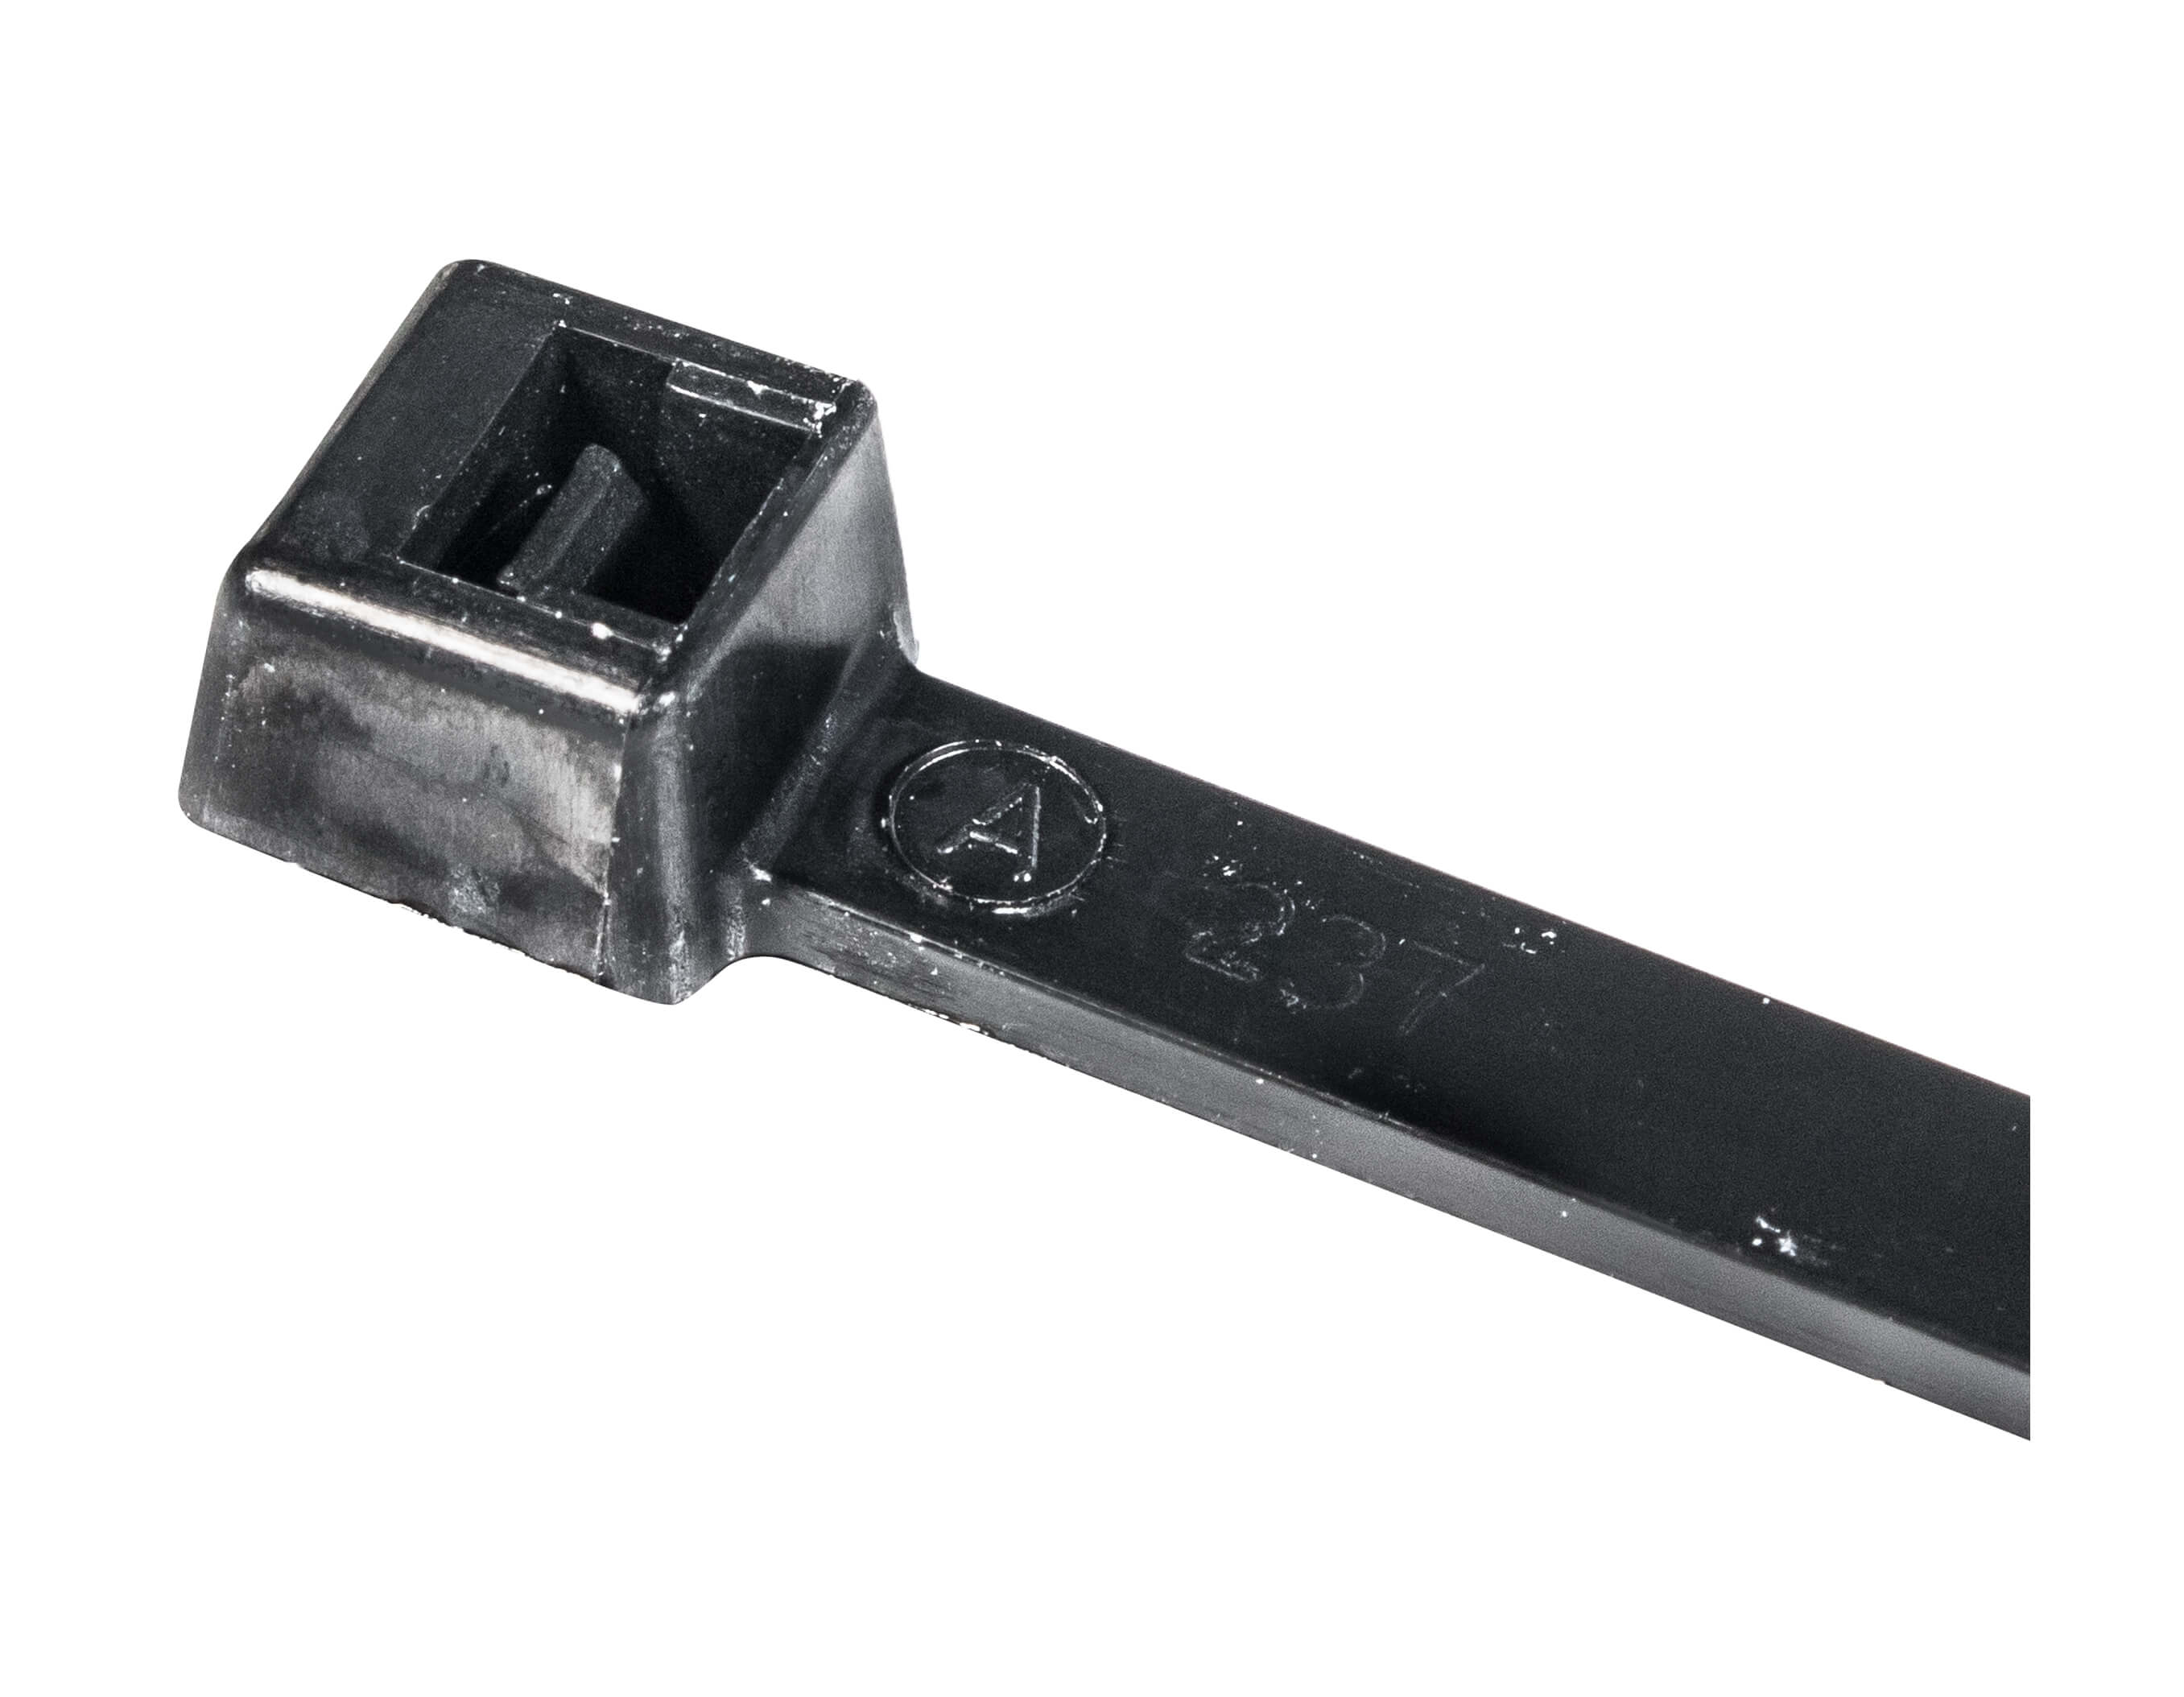 COLD TEMP. CABLE TIE BLACK 0.18 X 11.25" 50LBS